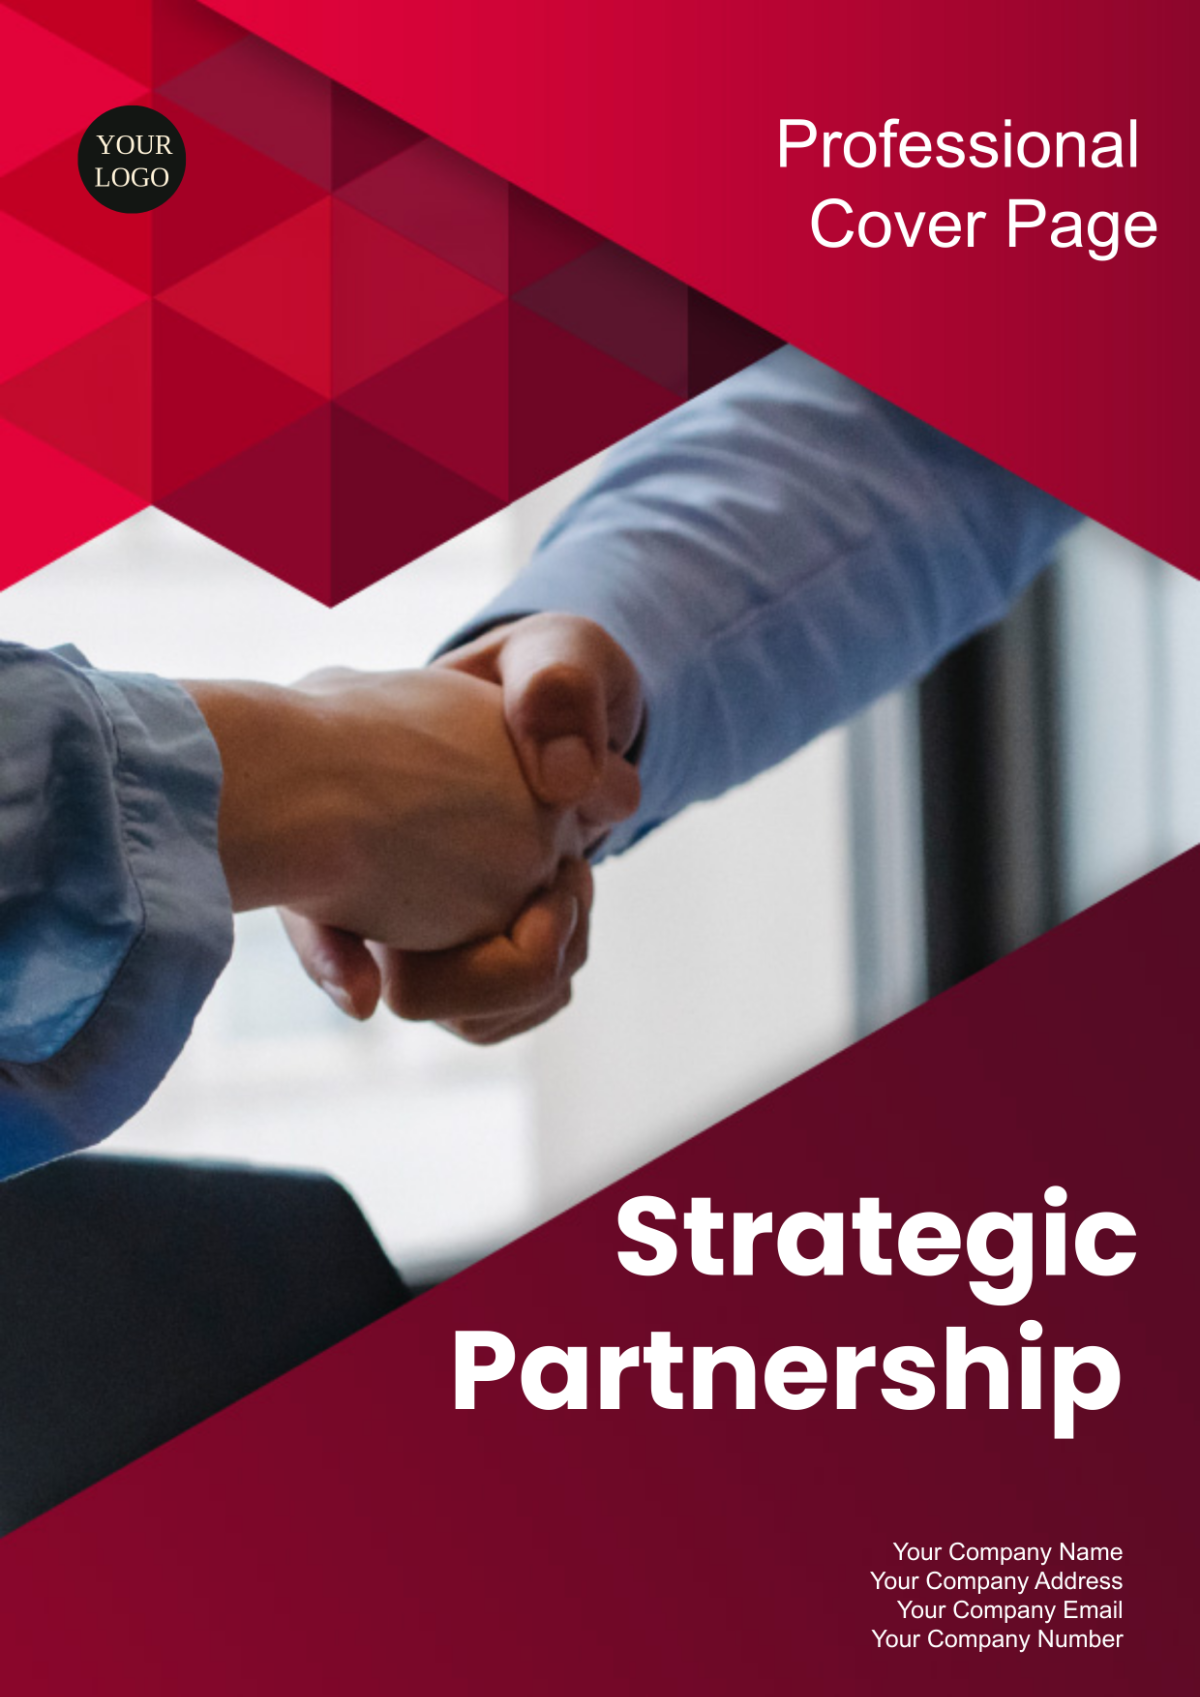 Strategic Partnerships Professional Cover Page